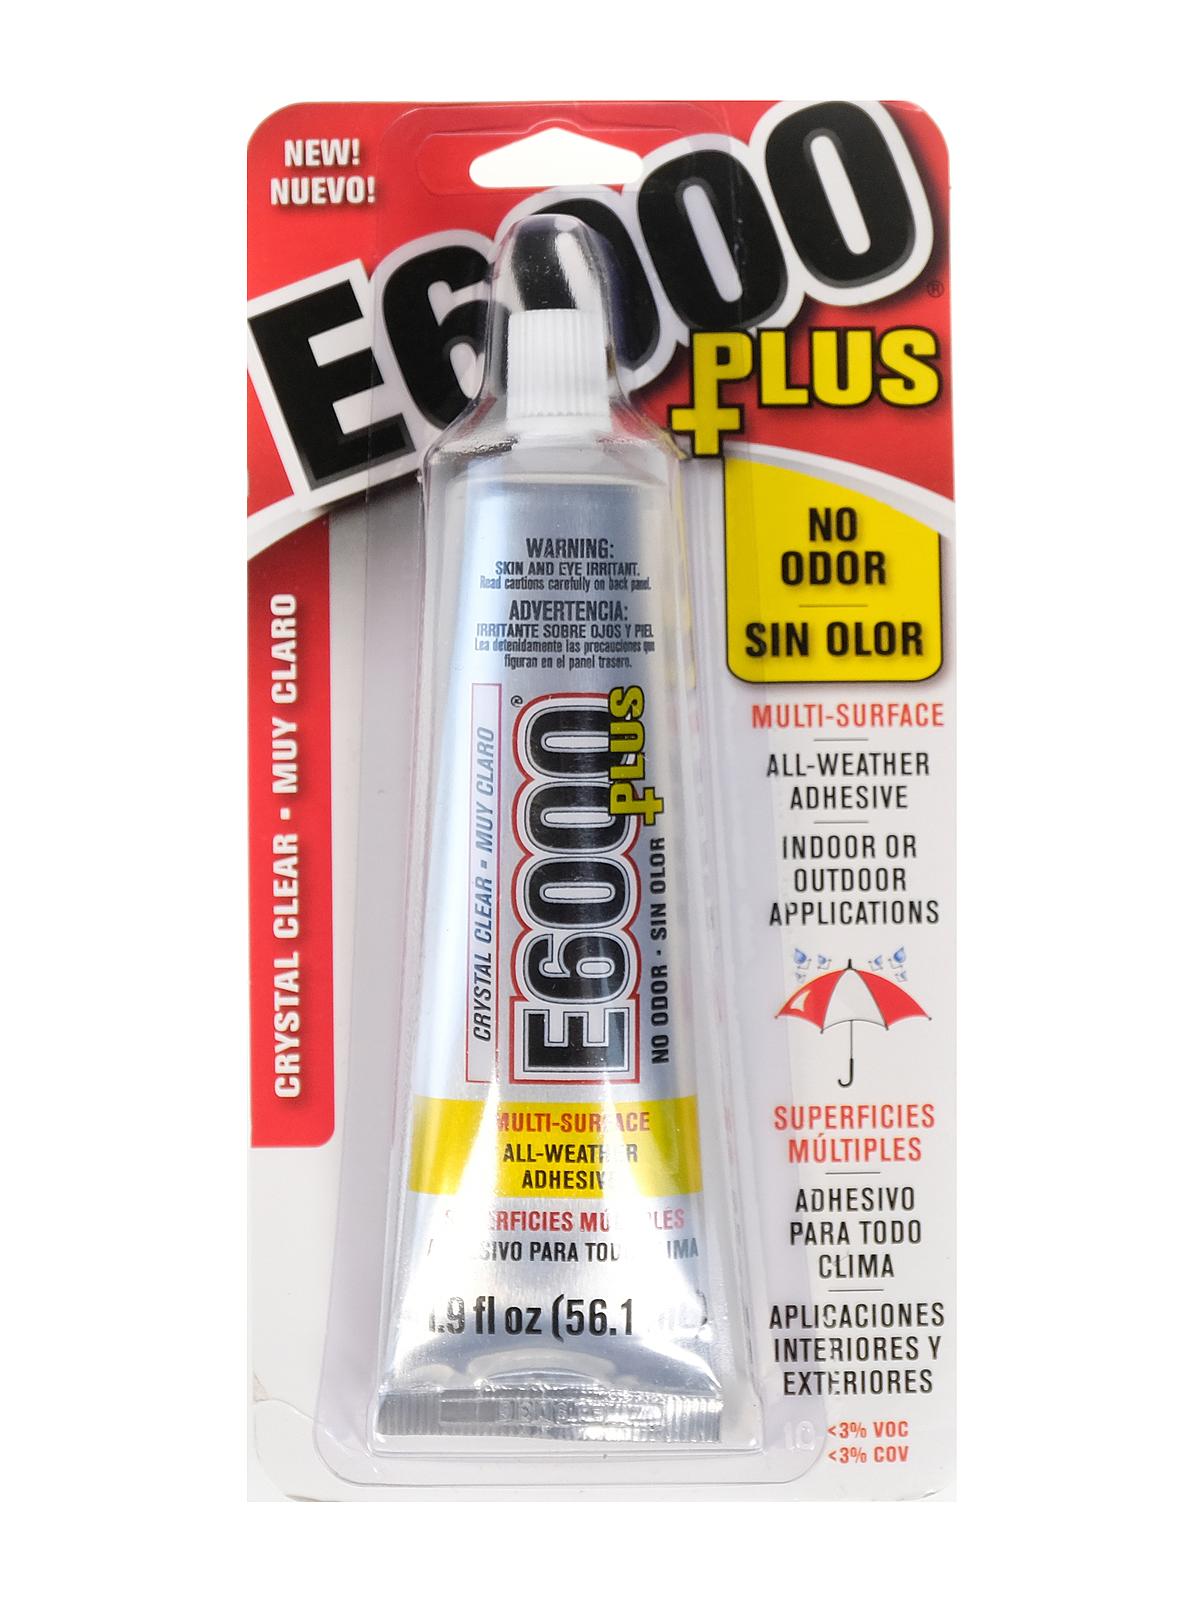 Eclectic Products - E-6000 Plus Clear Industrial Strength Adhesive - 1.9 oz. Tube